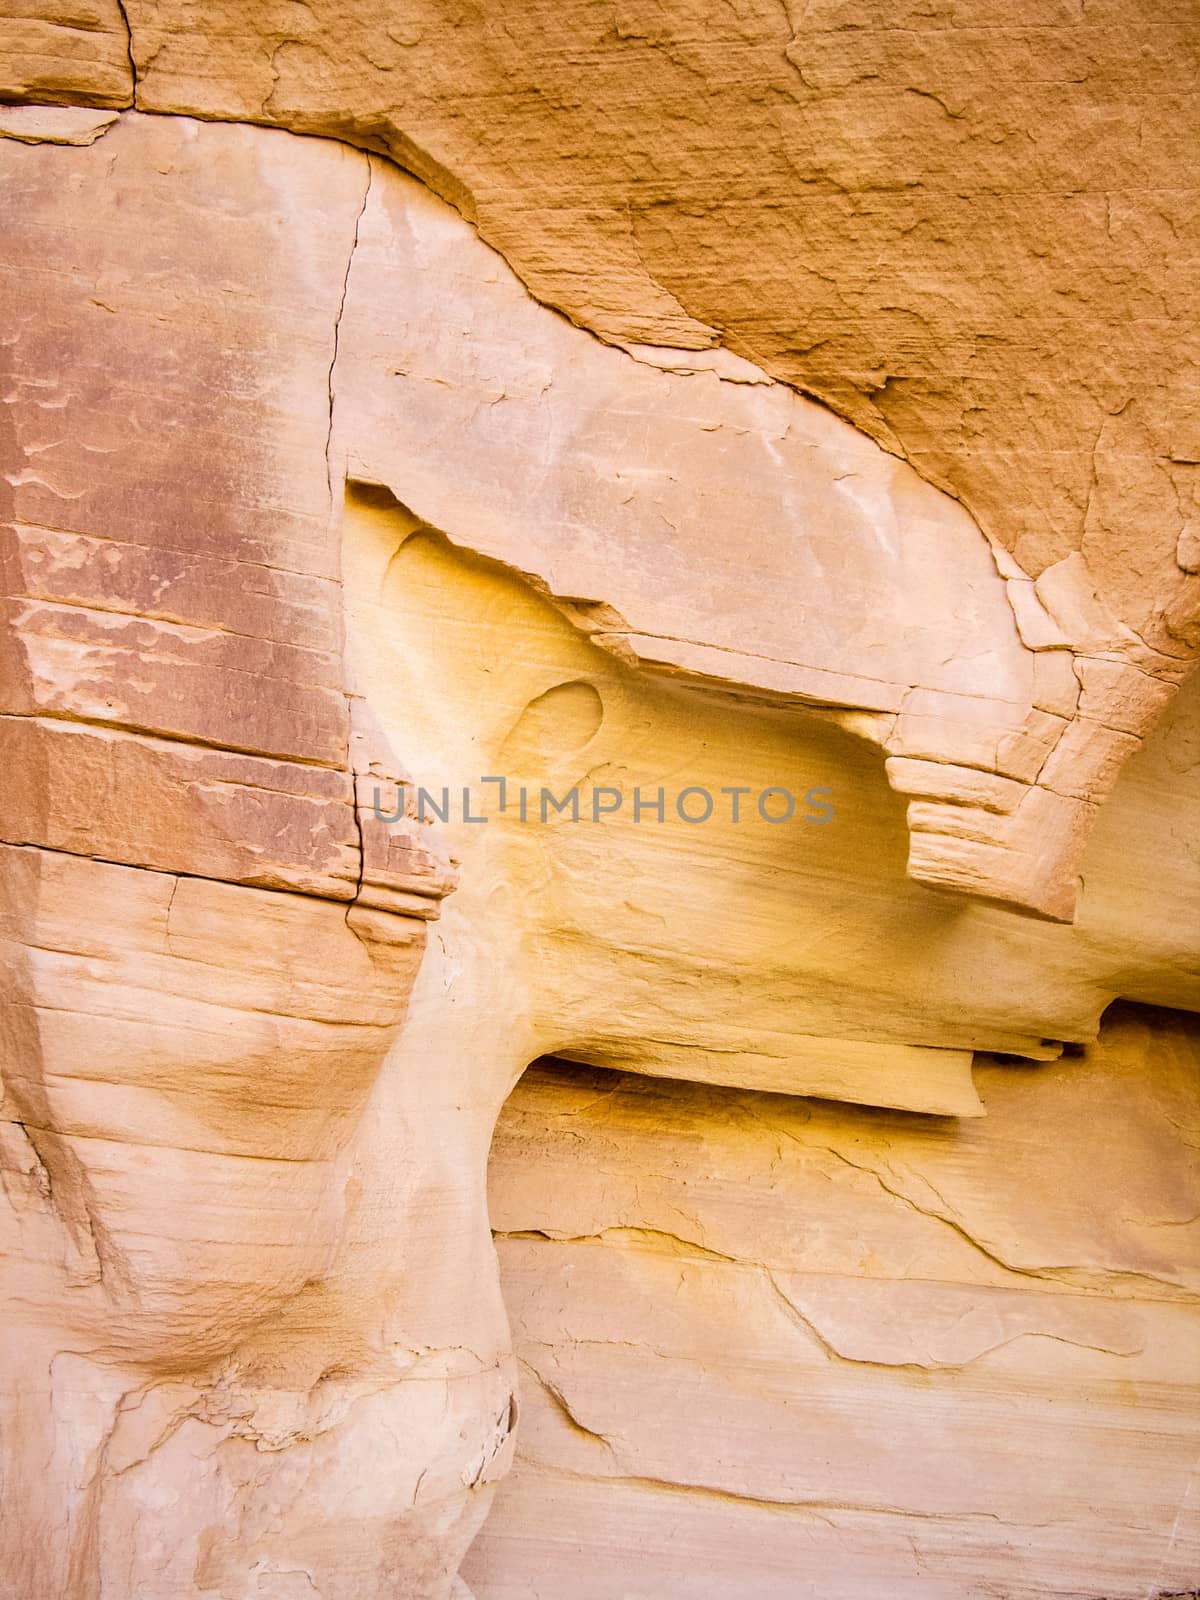 Yellow sandstone walls in Valley of Fire State Park, Nevada